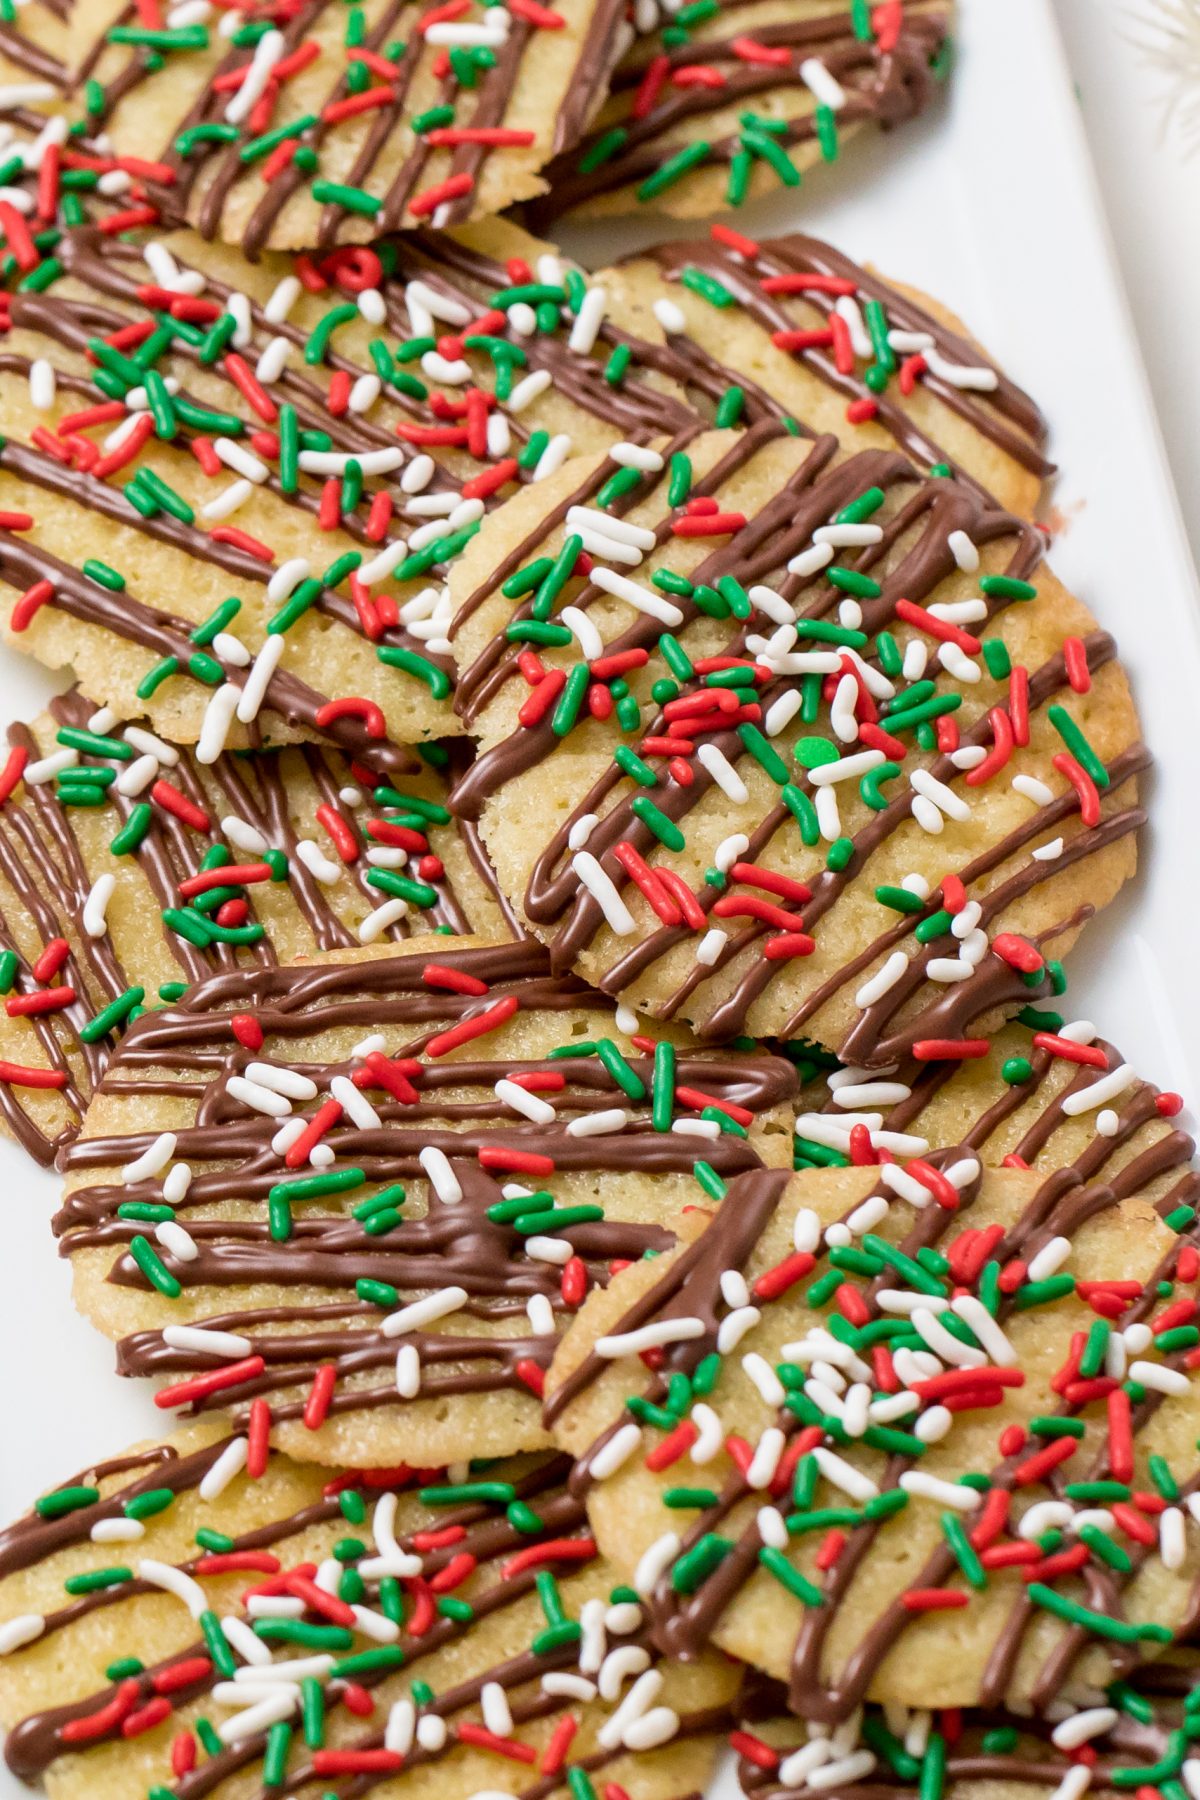 5D4B6975 - Chocolate Drizzled Christmas Cookies with Holiday Jimmies